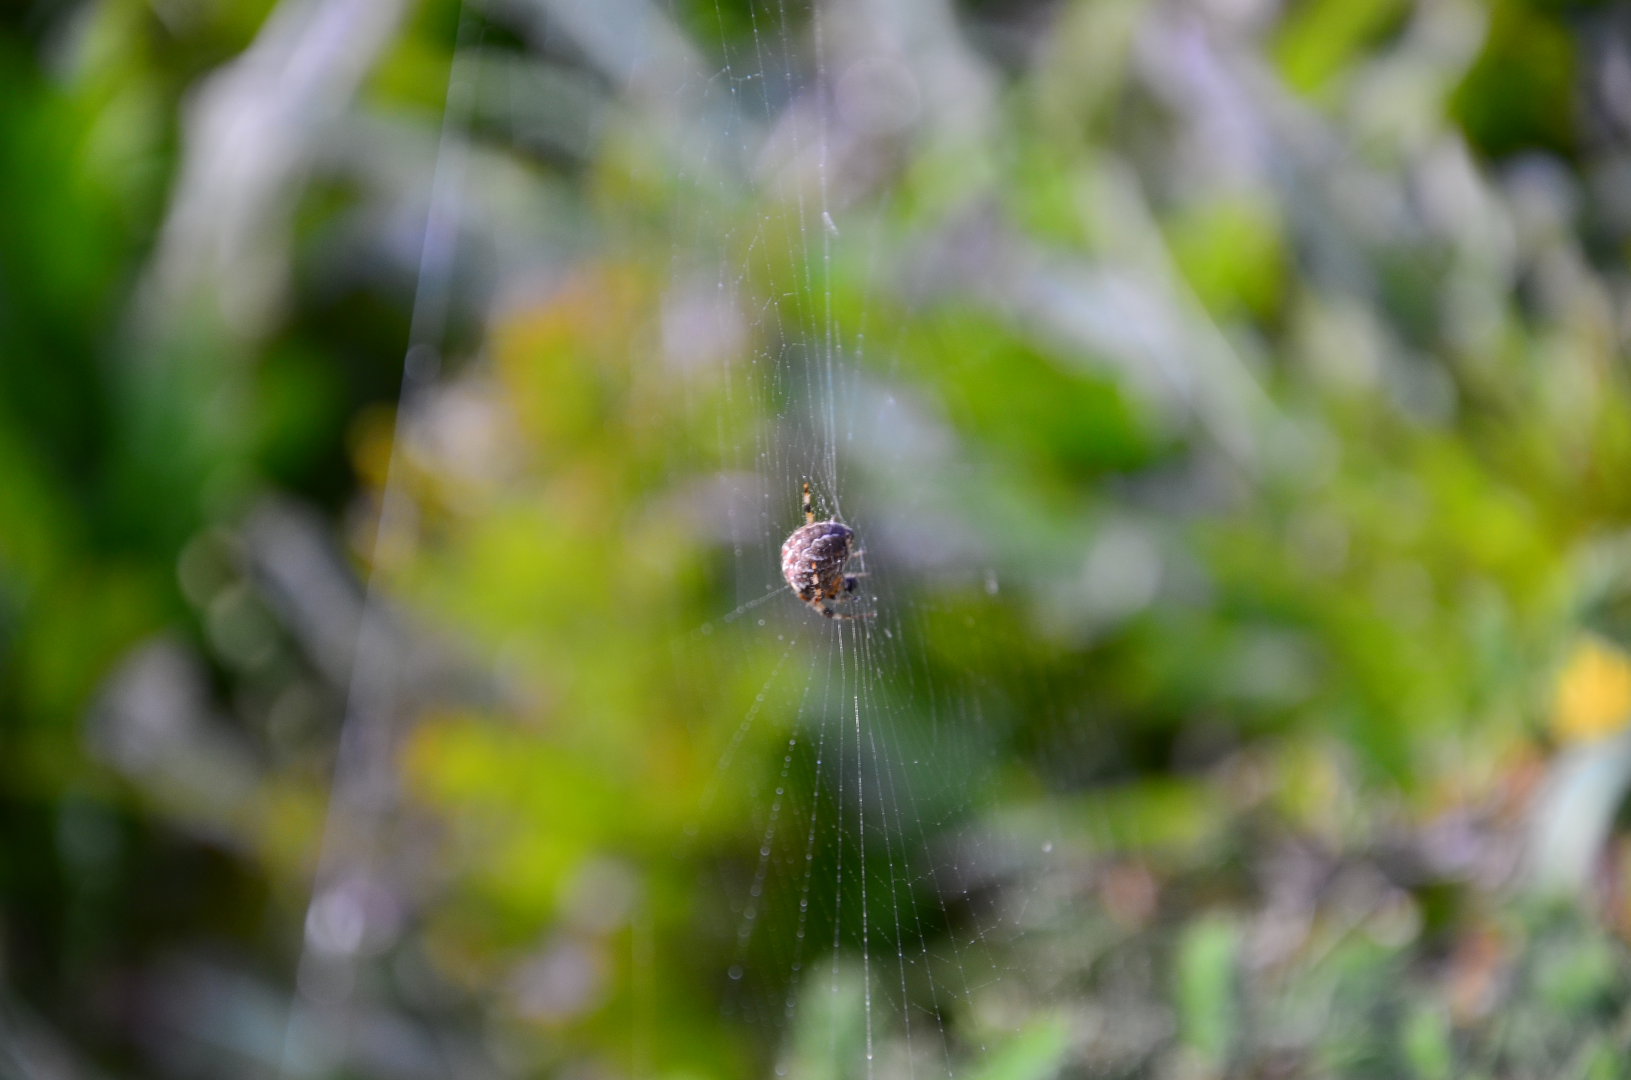 Spider at the hub of its web